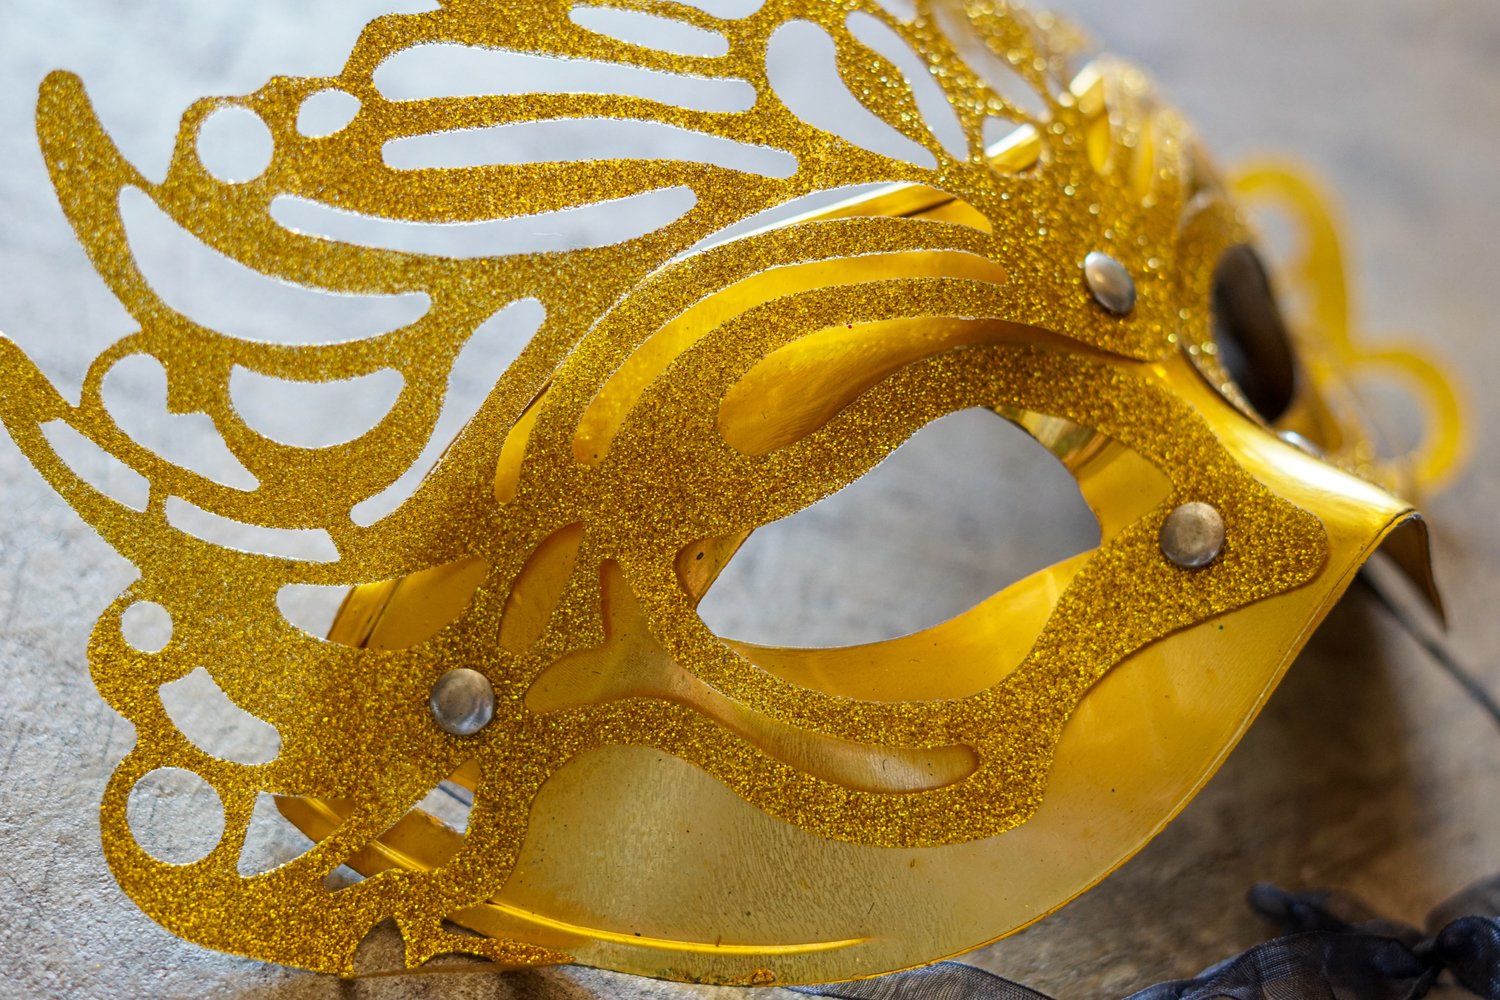 Decorate an eye mask and wear it to a Mardi Gras-style luncheon at the Pocono Mountain Lake Estates.